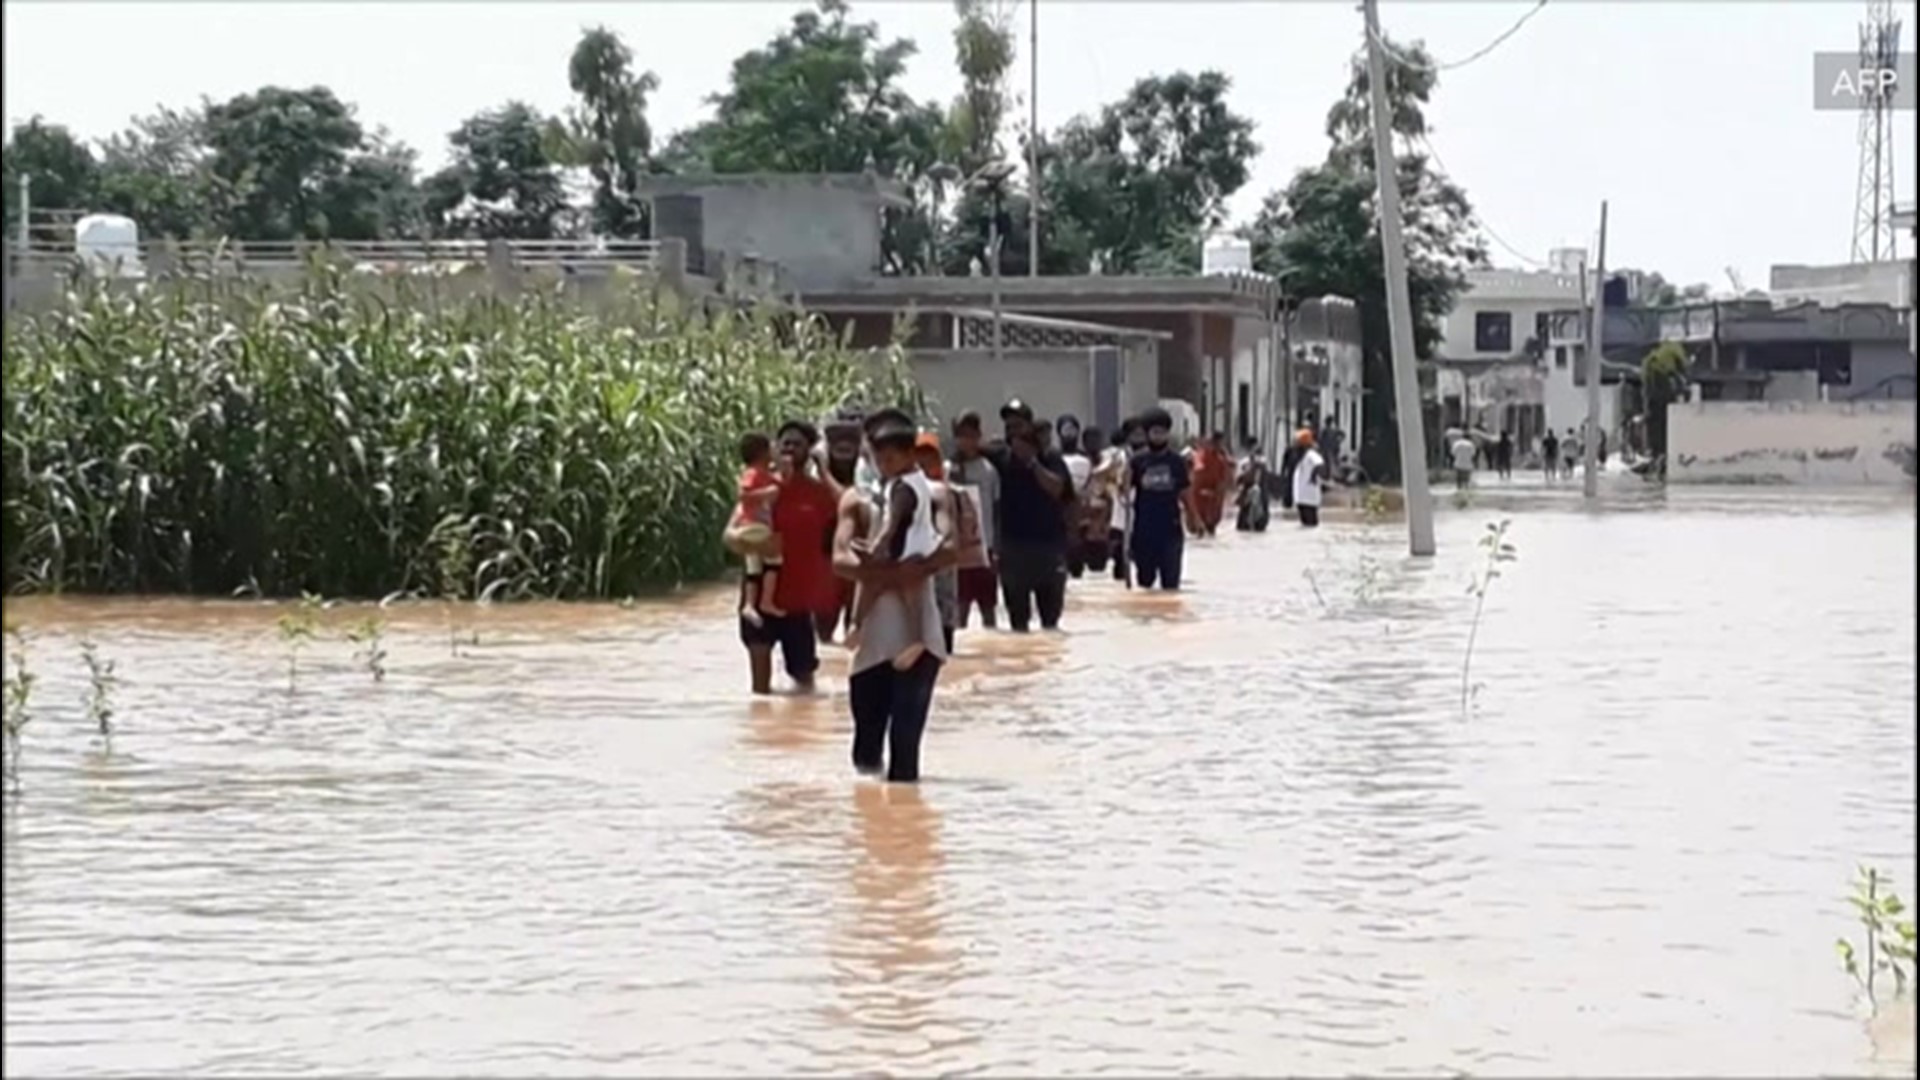 Residents of Kang Khurd village, in northern India, were forced to maneuver through knee-deep water to get around, after flooding ravaged the area on Aug. 20.